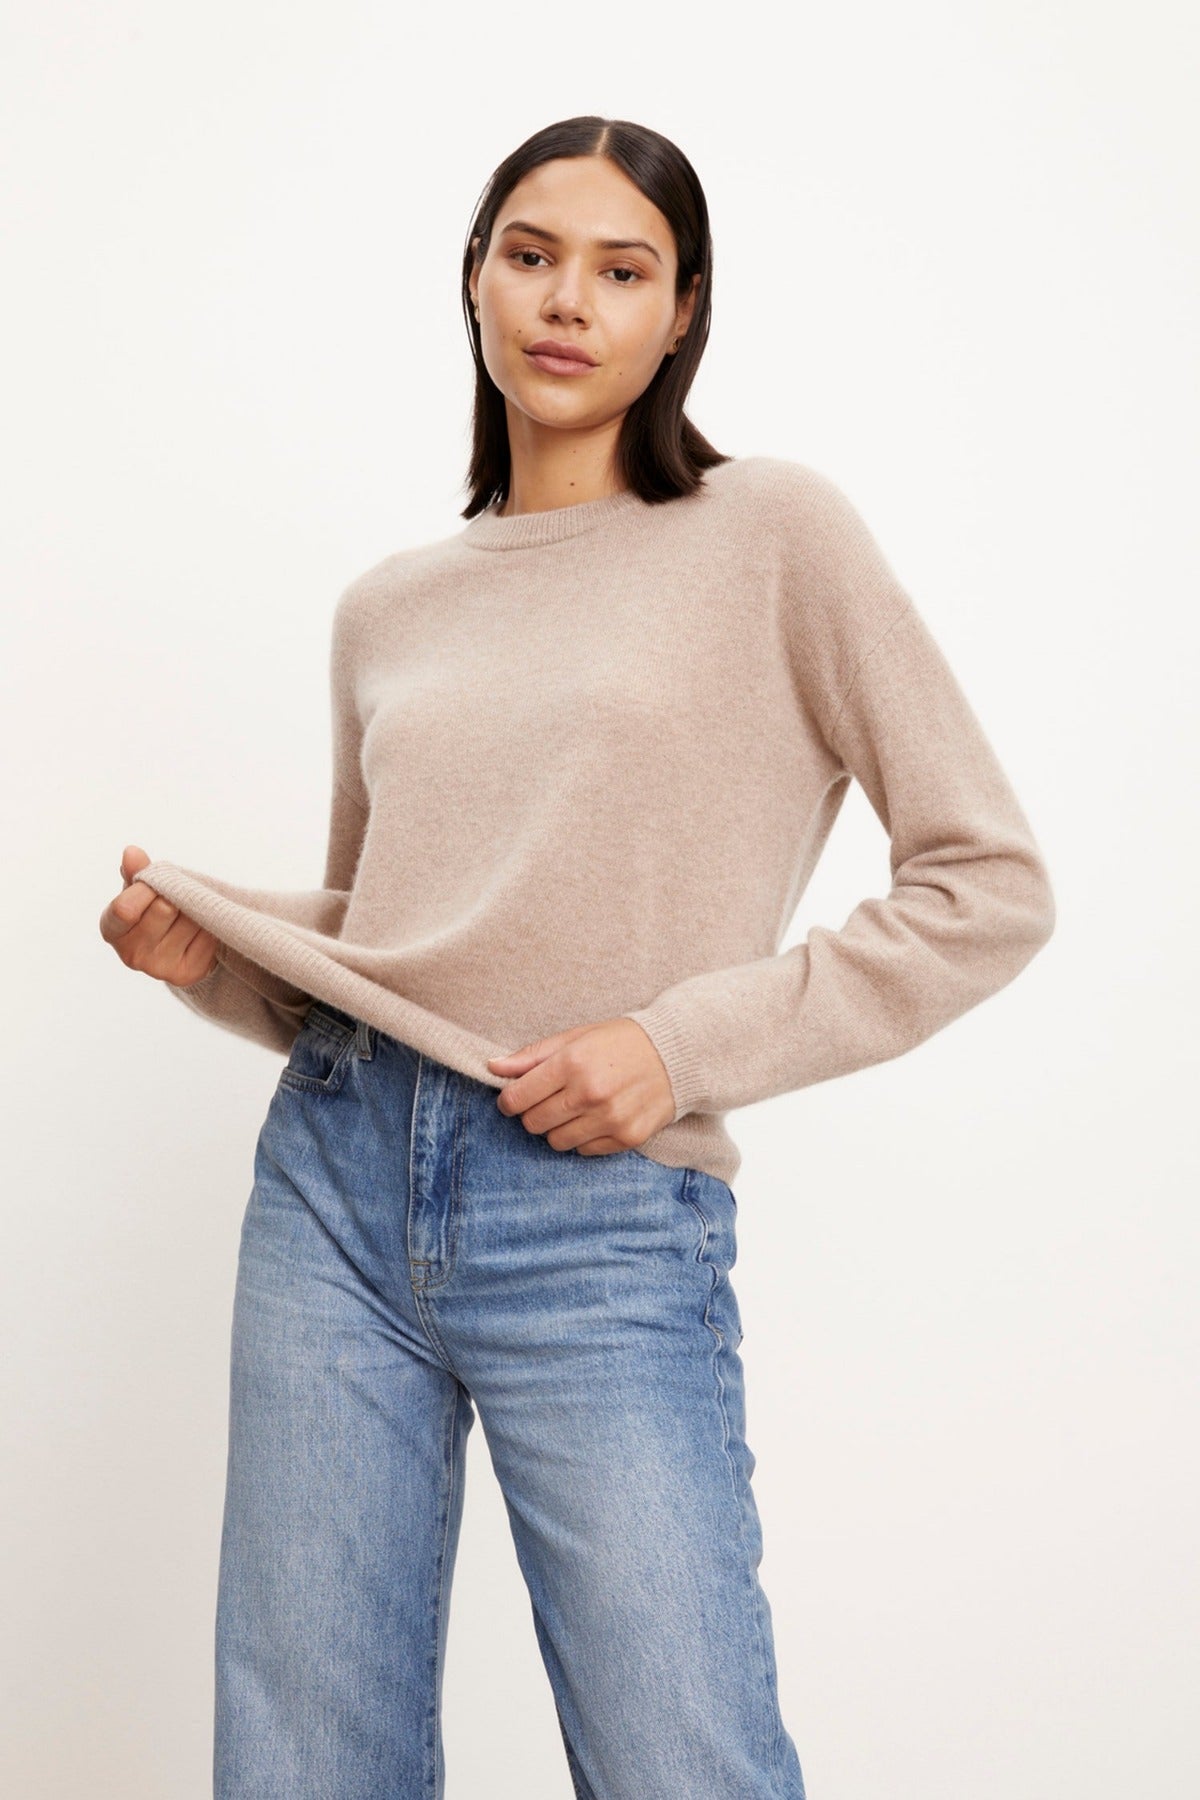 The model is wearing the Velvet by Graham & Spencer BRYNNE CASHMERE CREW NECK SWEATER with crewneck and ribbed trims, paired with blue jeans.-26883604480193